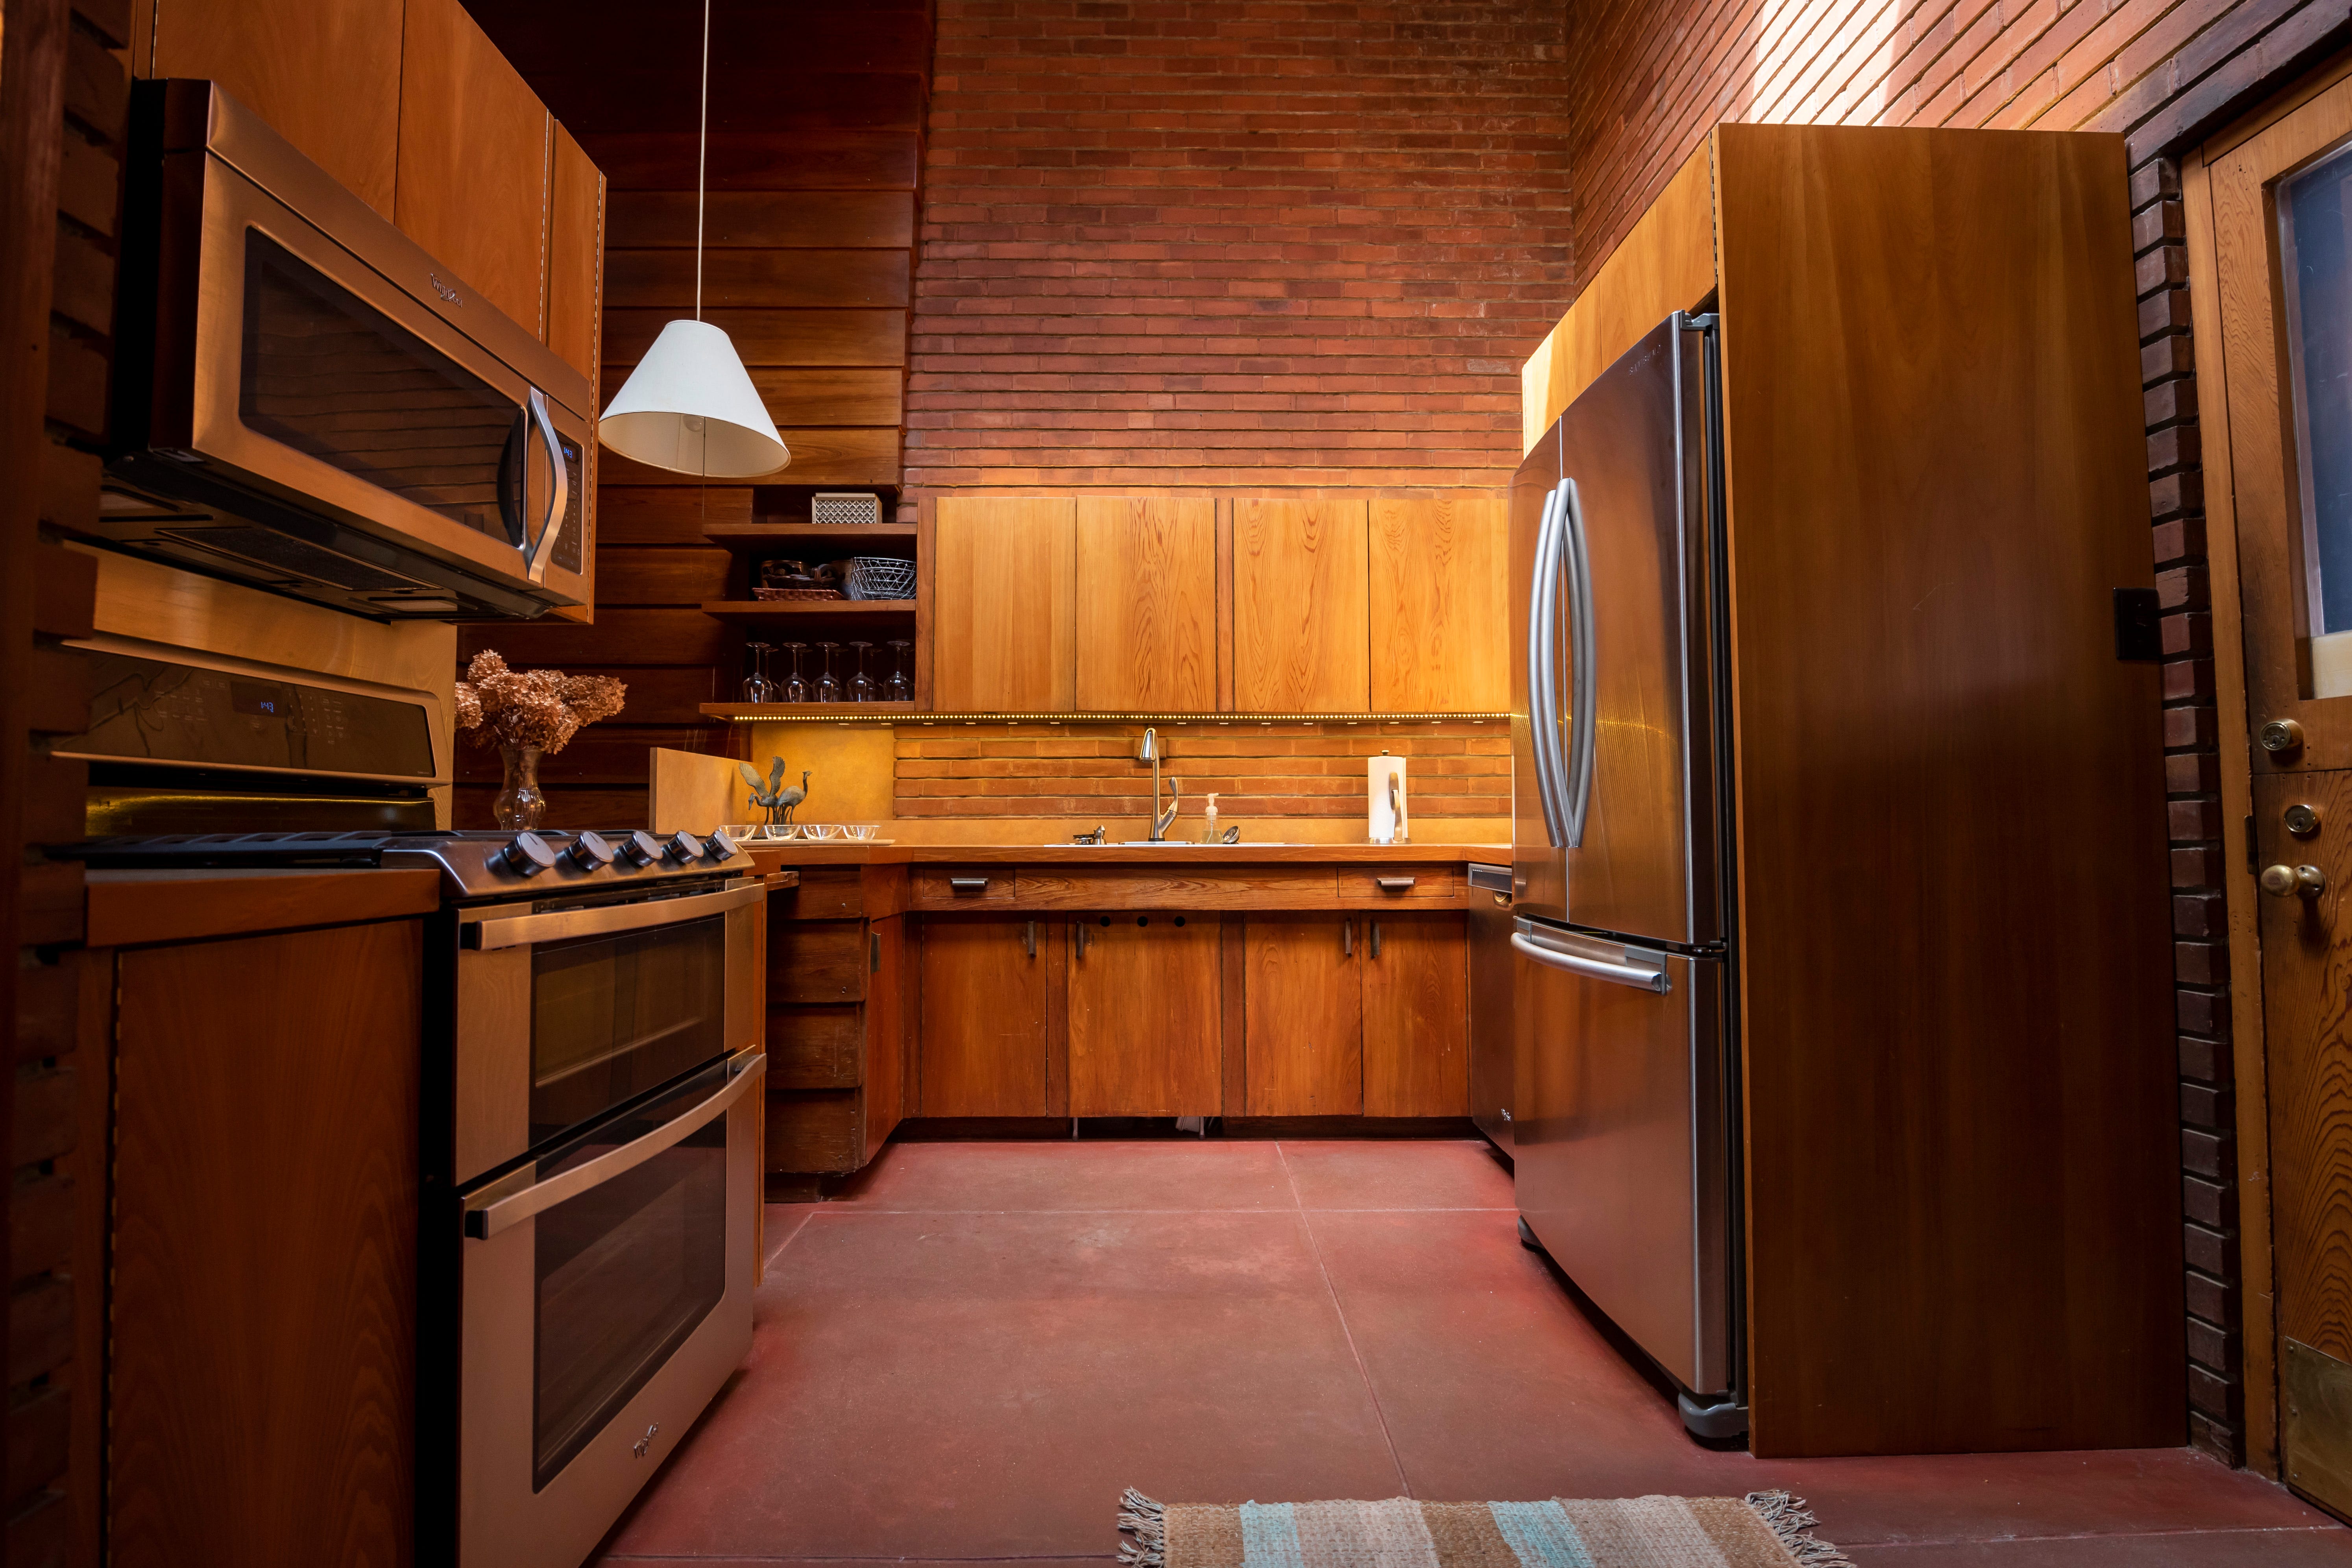 The kitchen originally had little storage space. Drawers were added later.